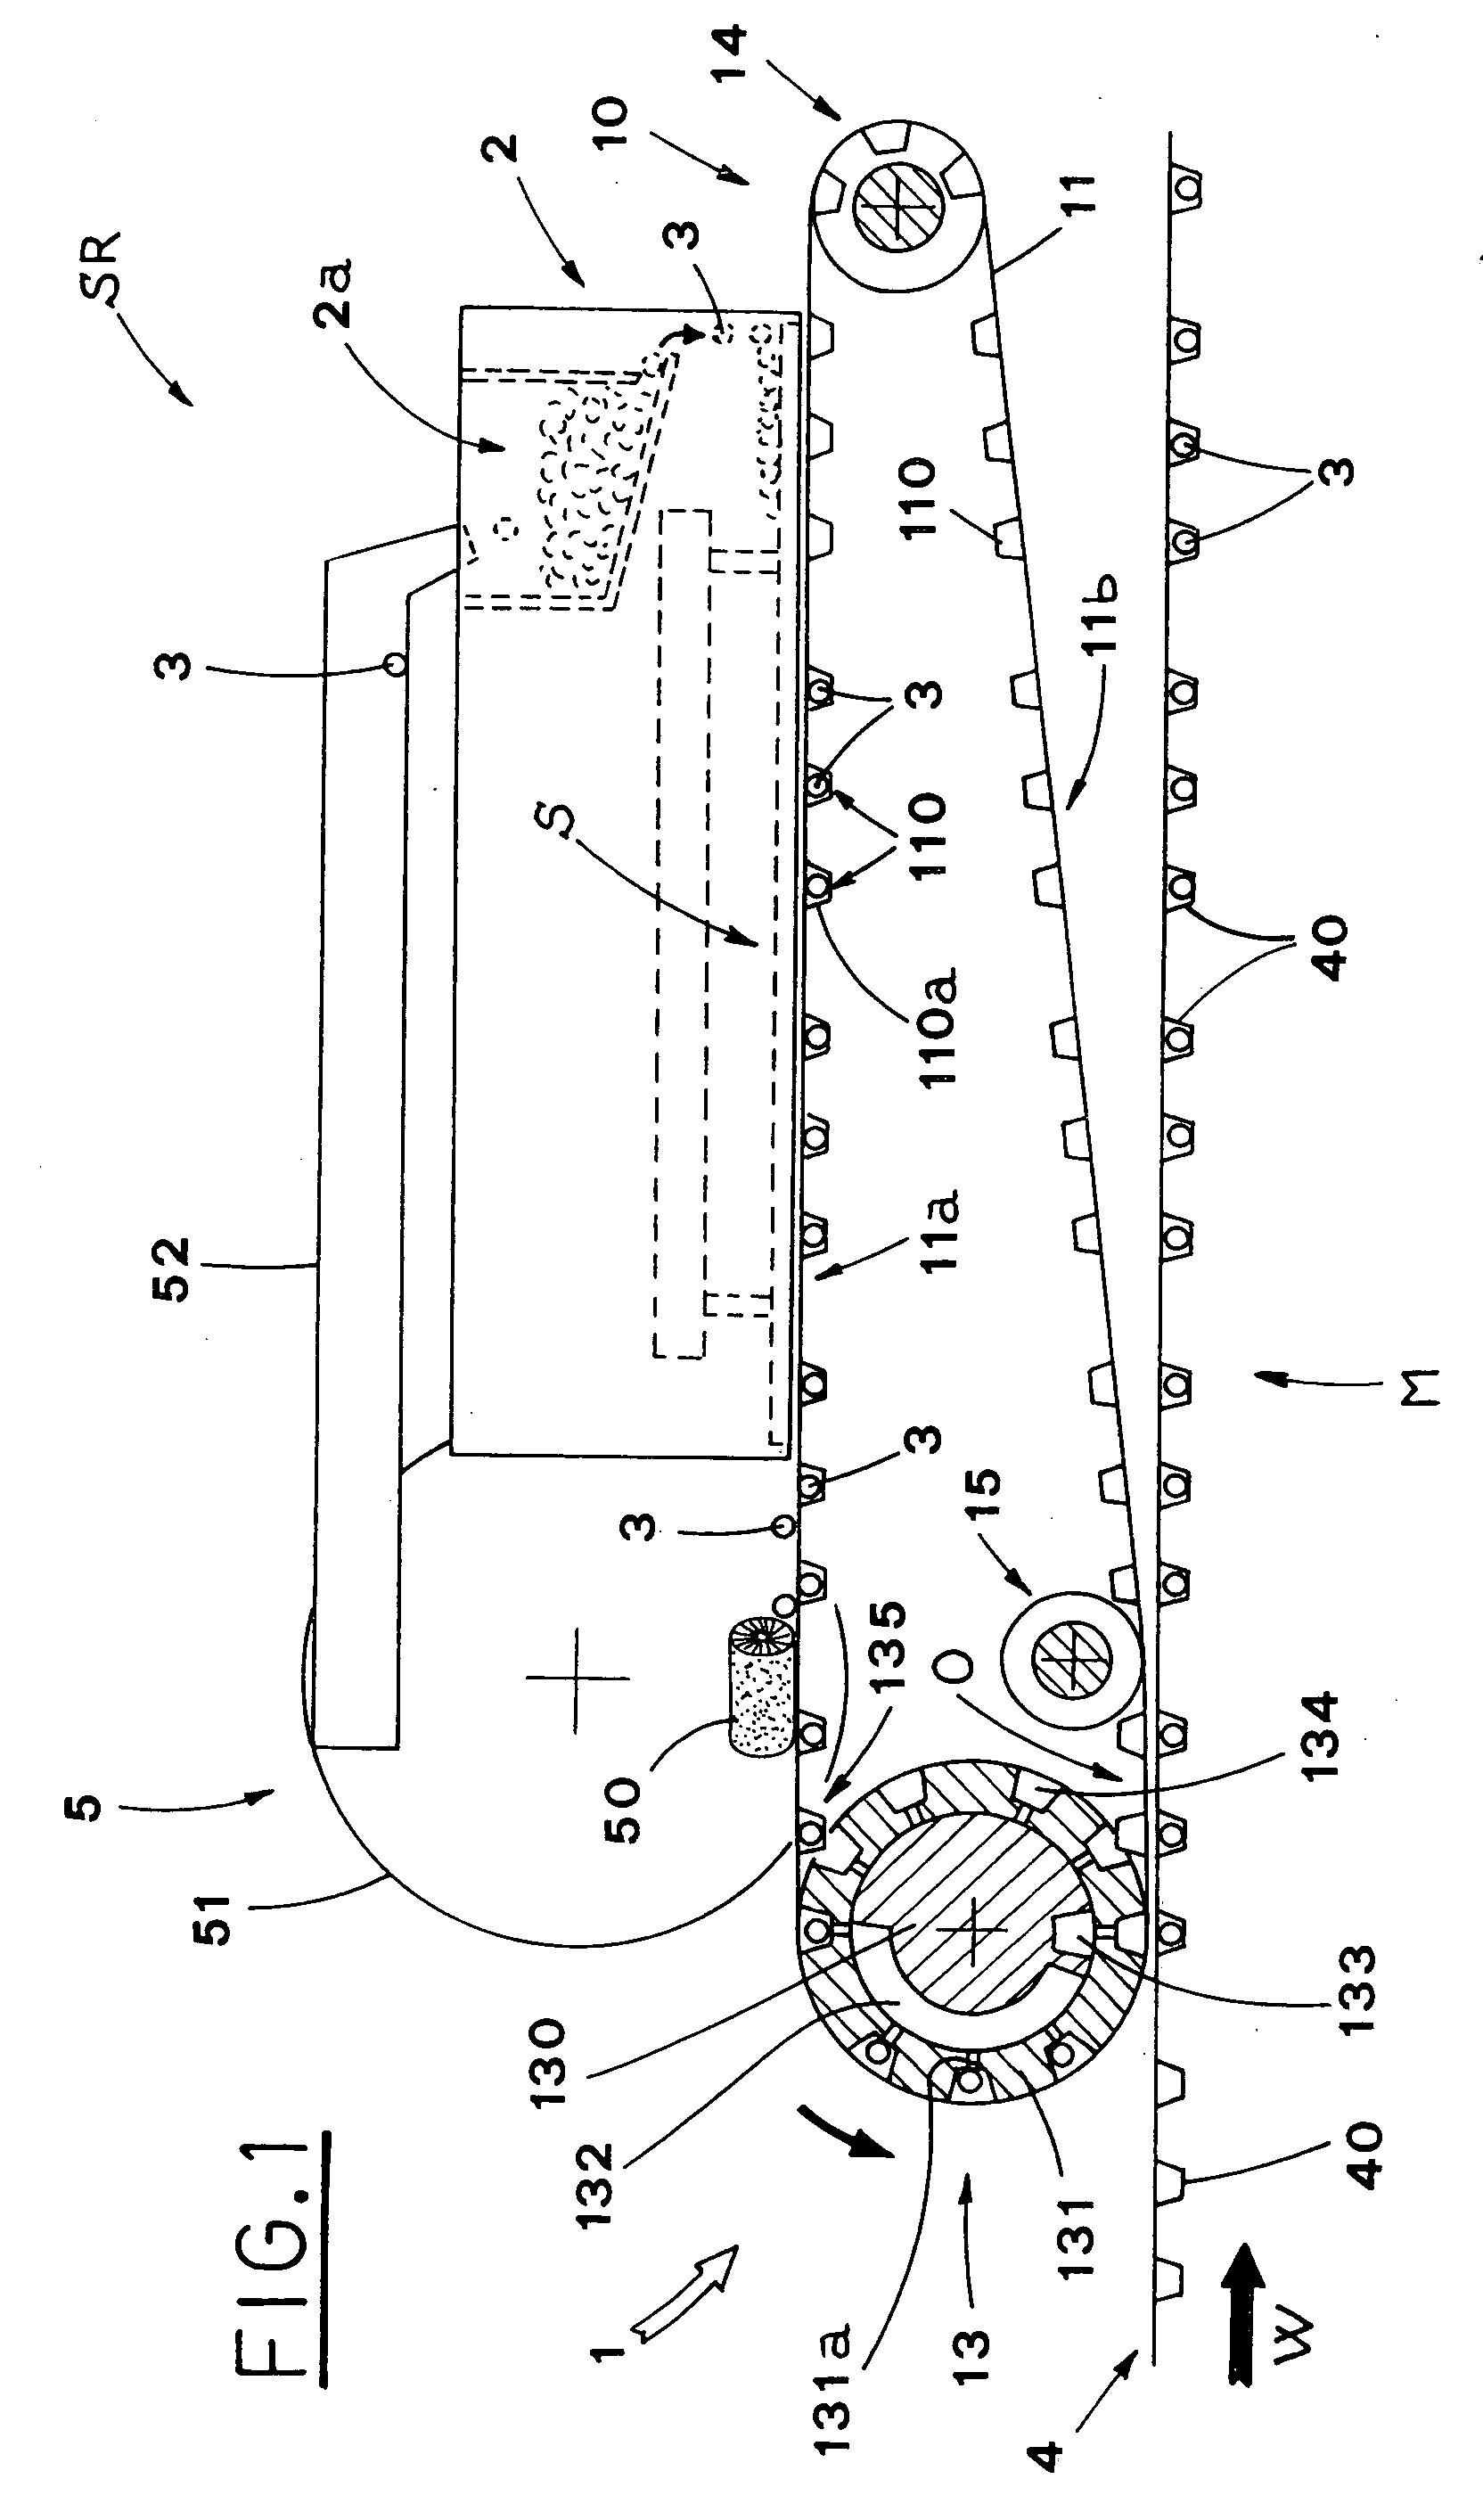 Unit for feeding products to a blistering machine